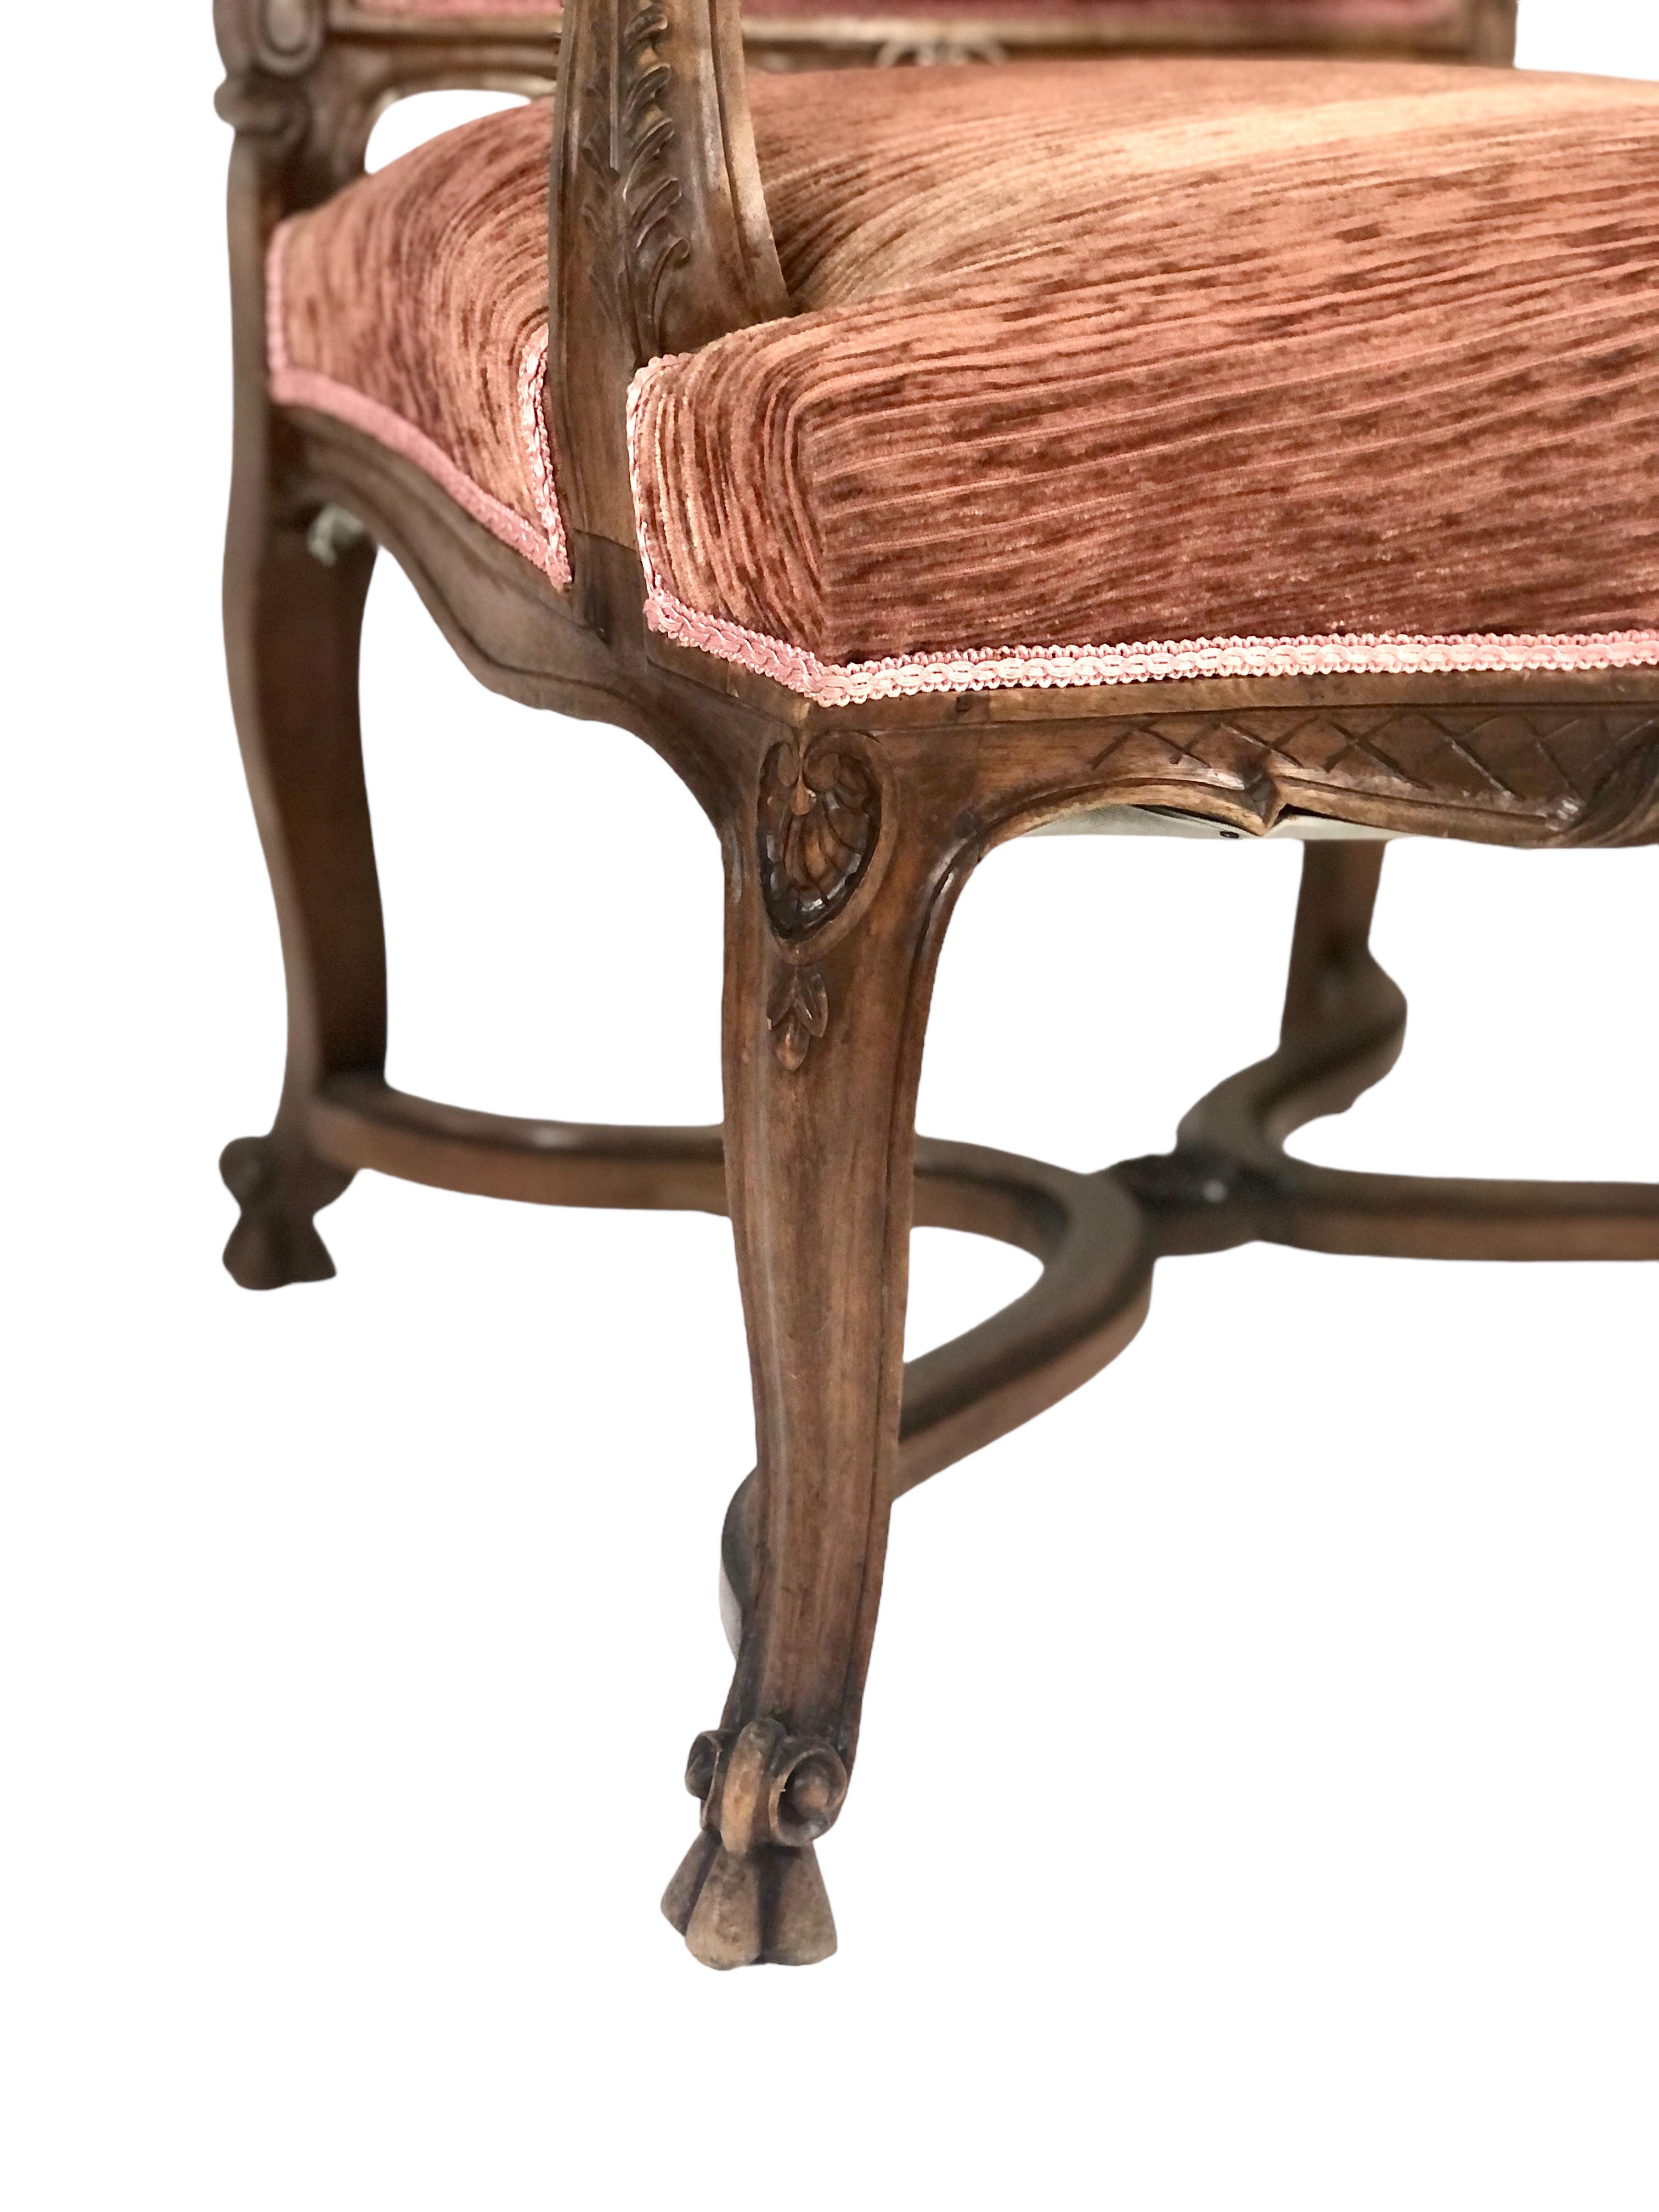 French 19th Century Pair of Walnut Regency Chairs Called “Fauteuils à La Reine” For Sale